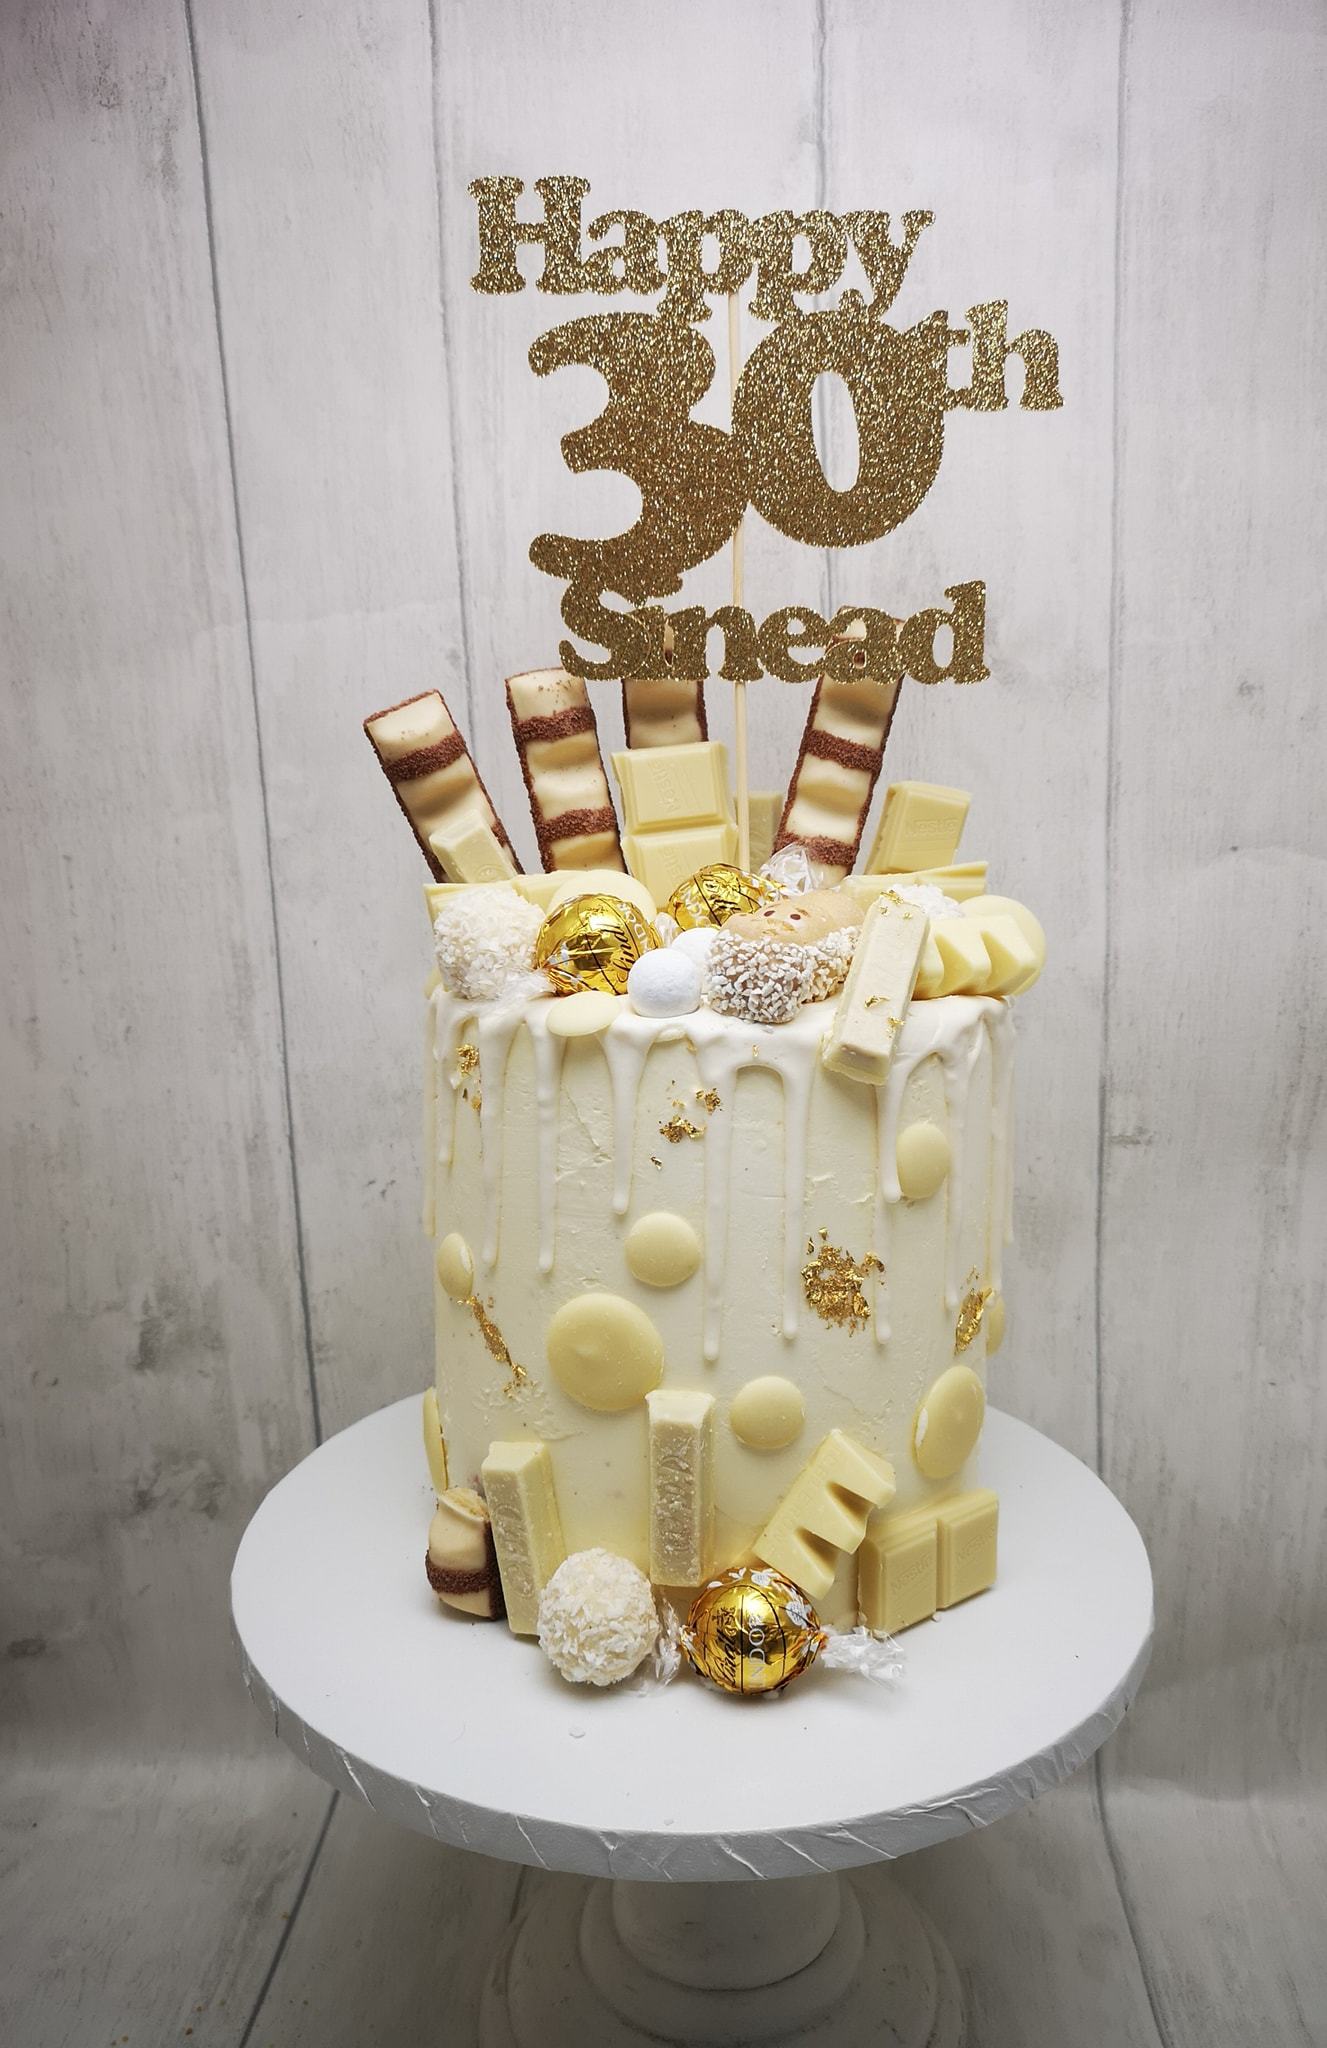 30th Birthday Cakes 40th Birthday Cakes Must See Ideas Here